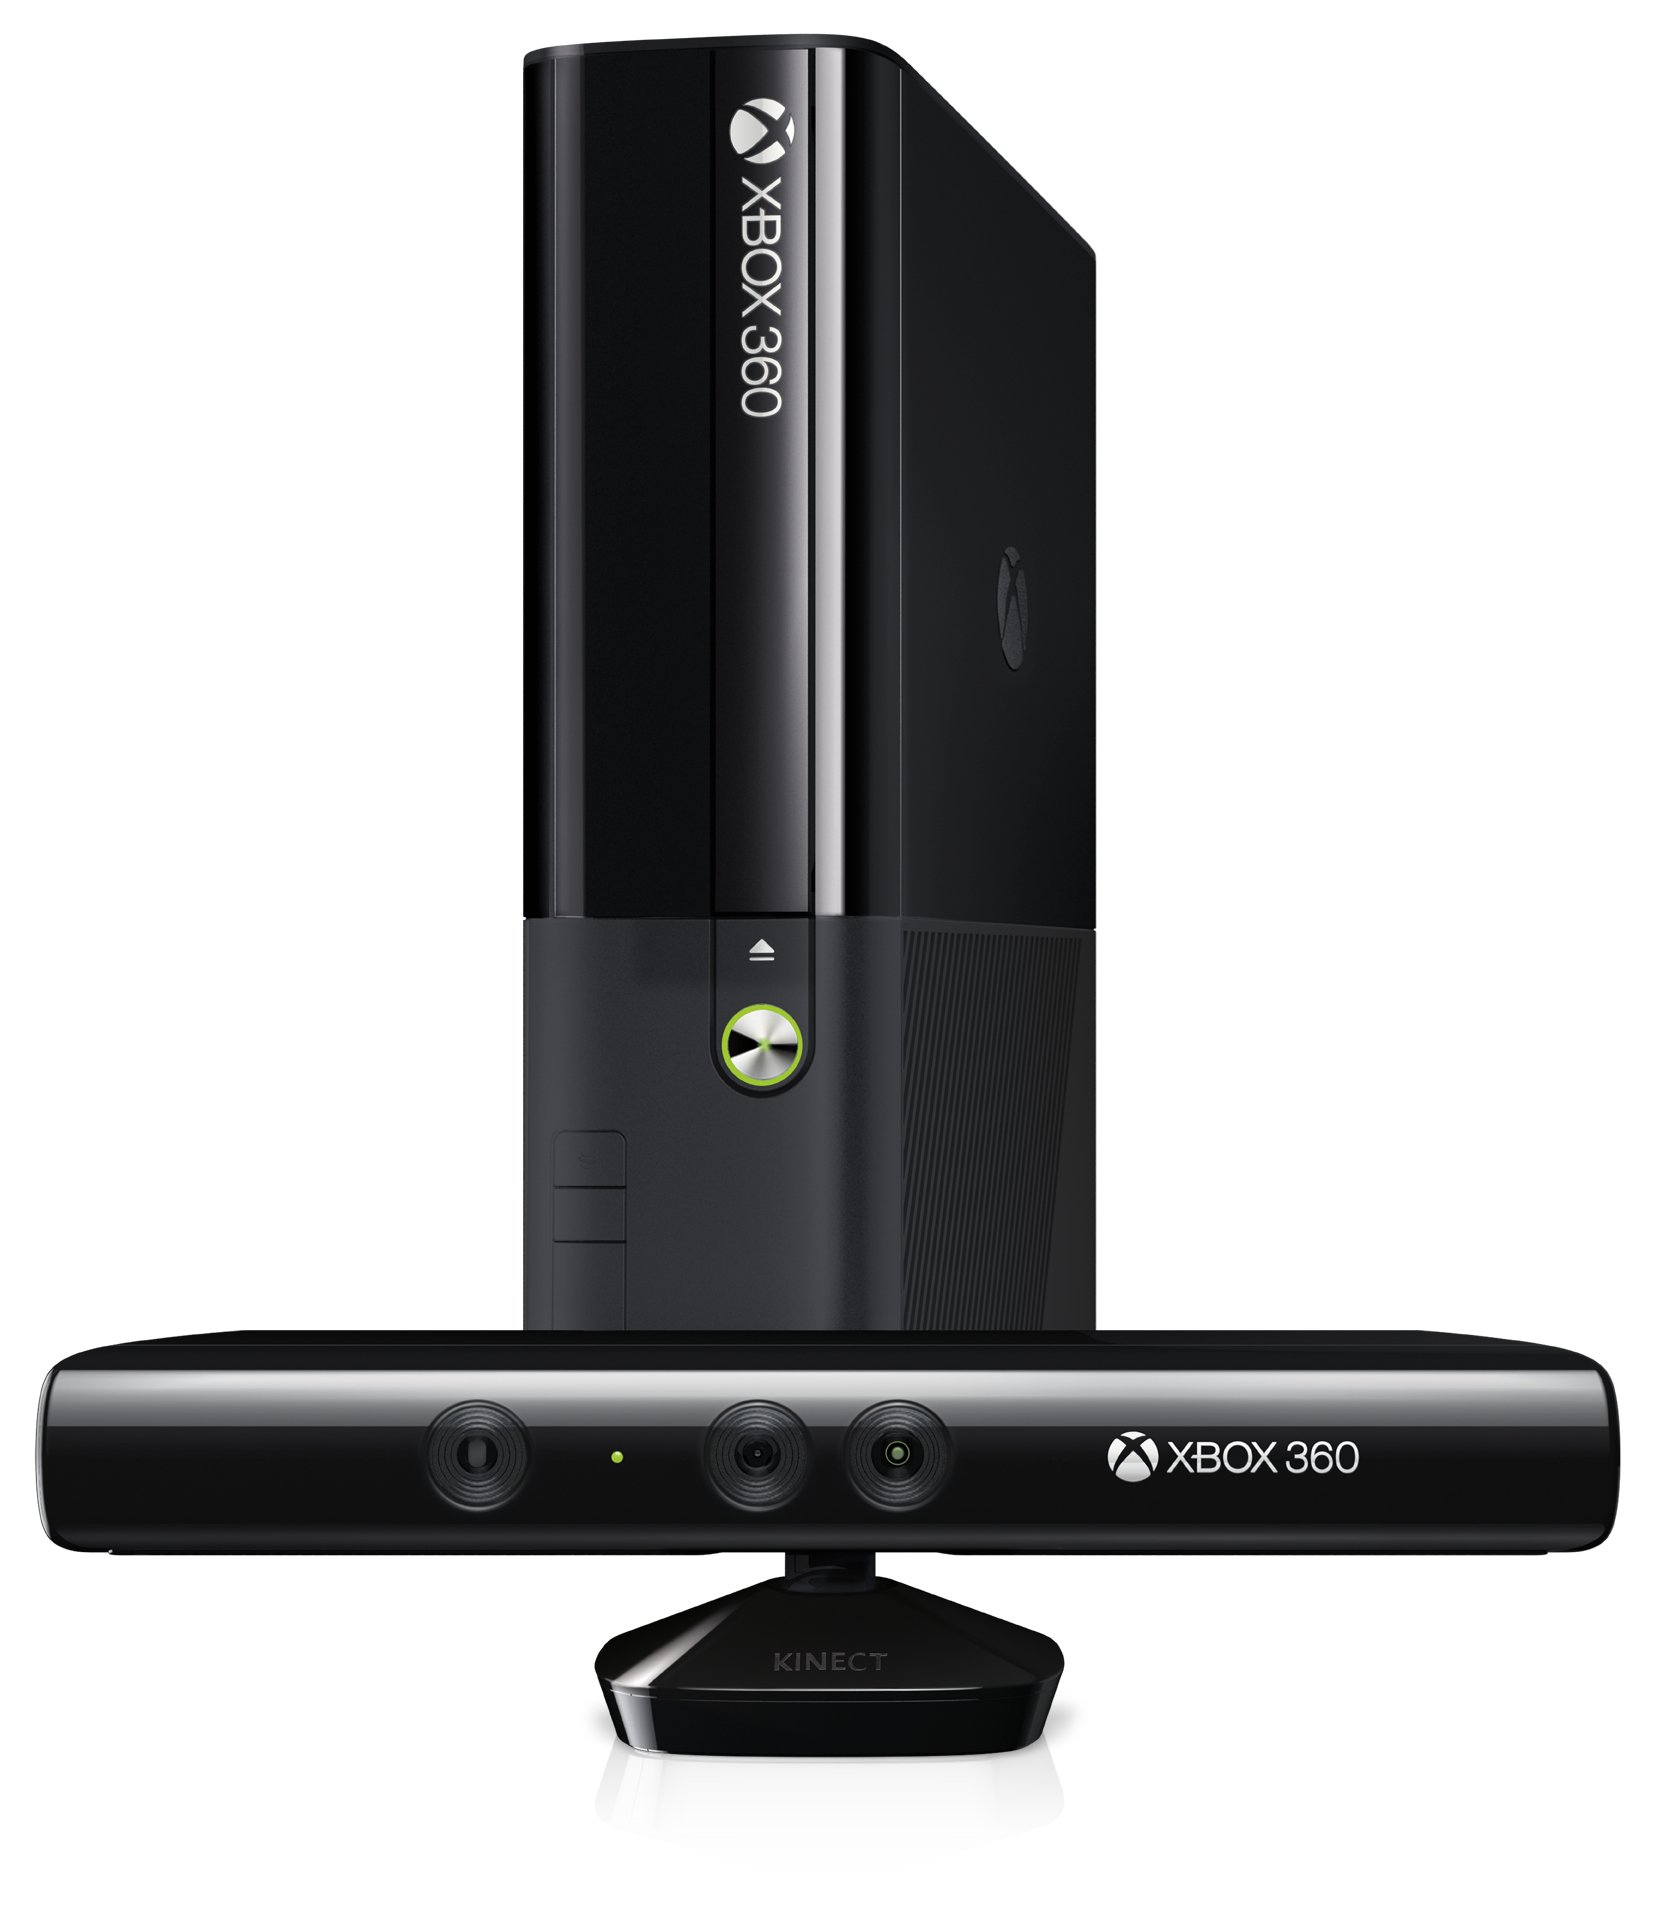 where can i buy an xbox 360